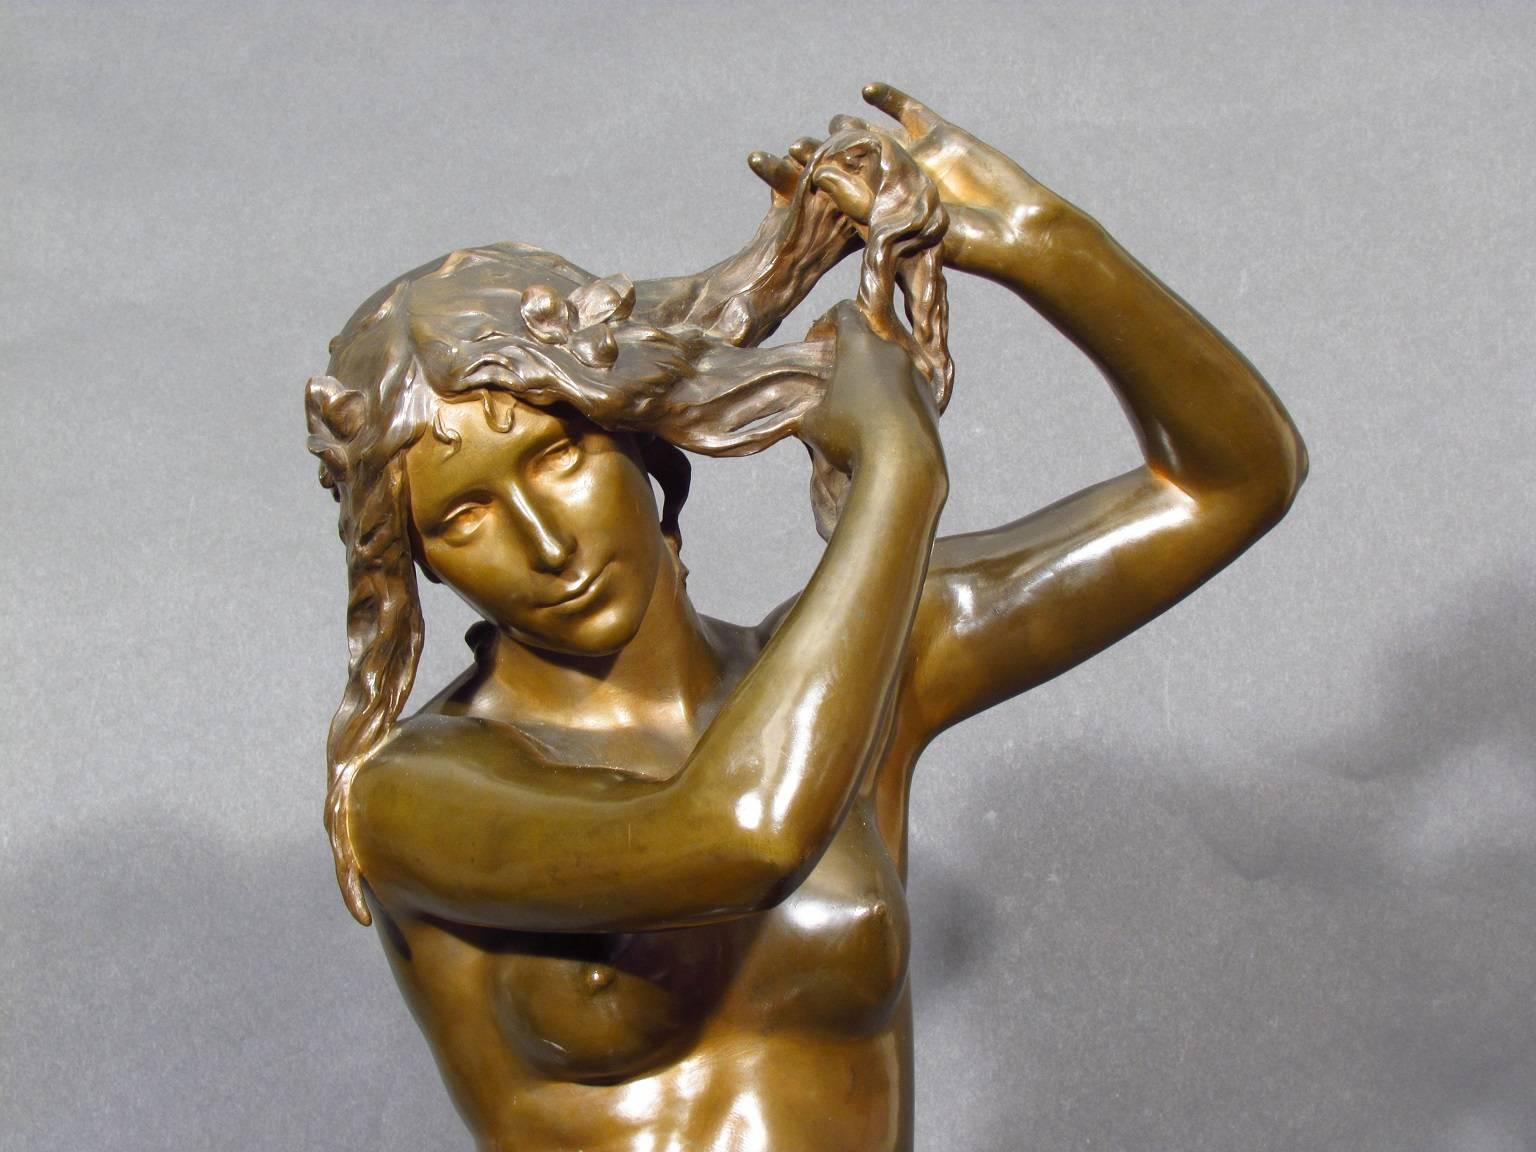 Le Matin  - Gold Nude Sculpture by Hector Lemaire